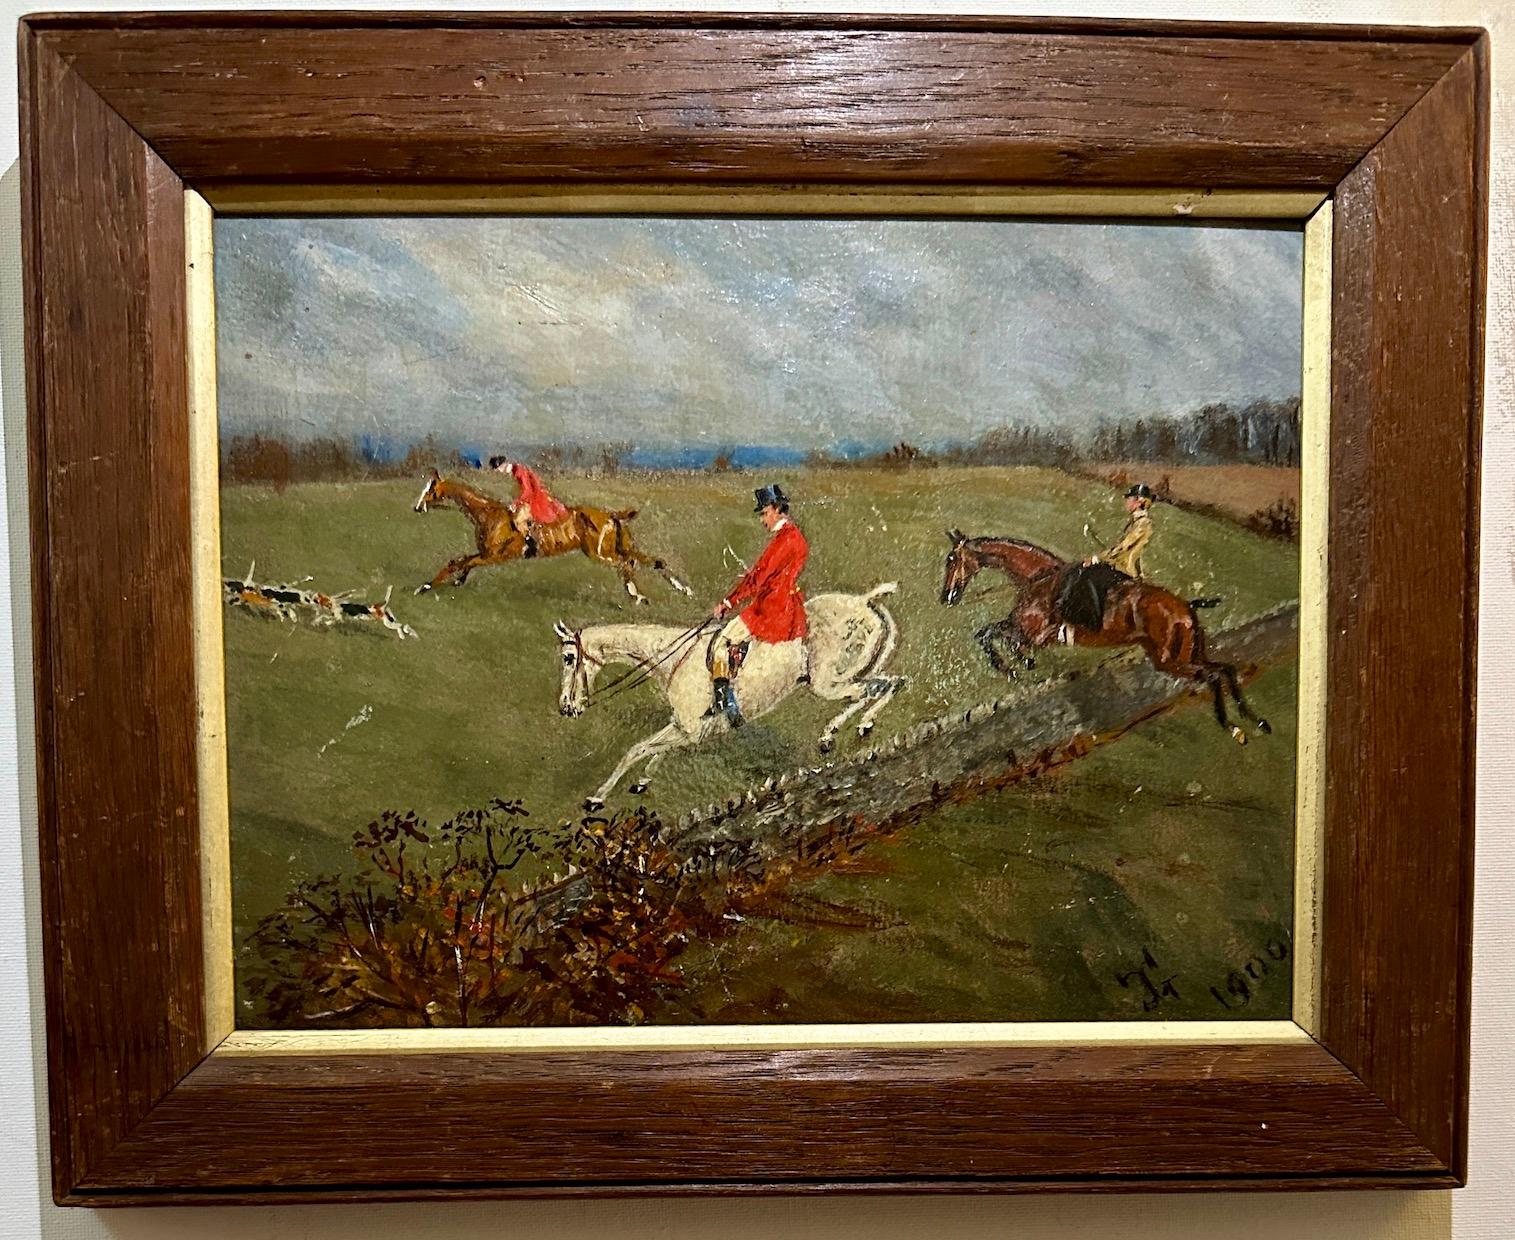 Antique English Fox hunting scene with huntsman jumping with hounds in a field